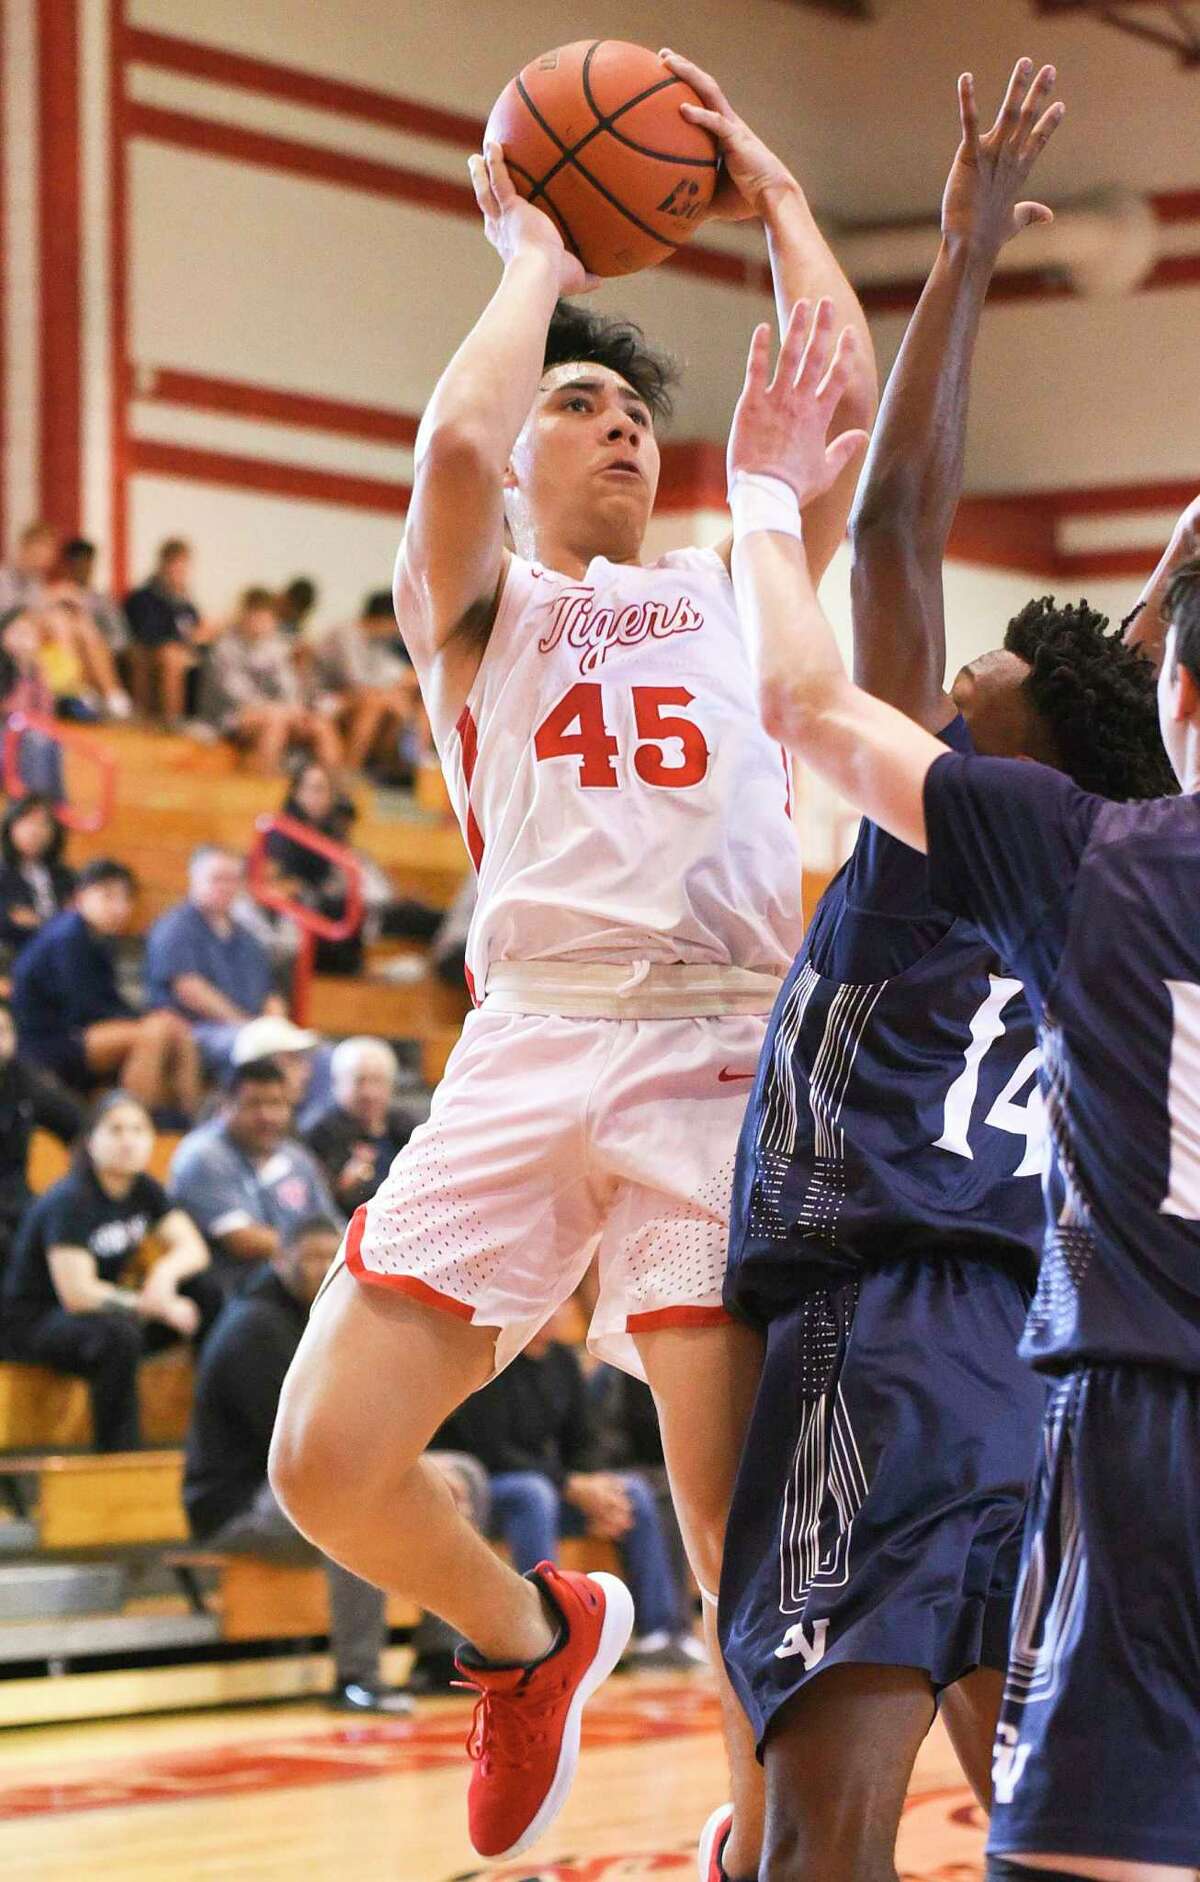 Nelson Vasquez earned co-Most Valuable Player District 29-5A last year honors along with teammate Mathew Duron after averaging 22.8 points per game as a junior.